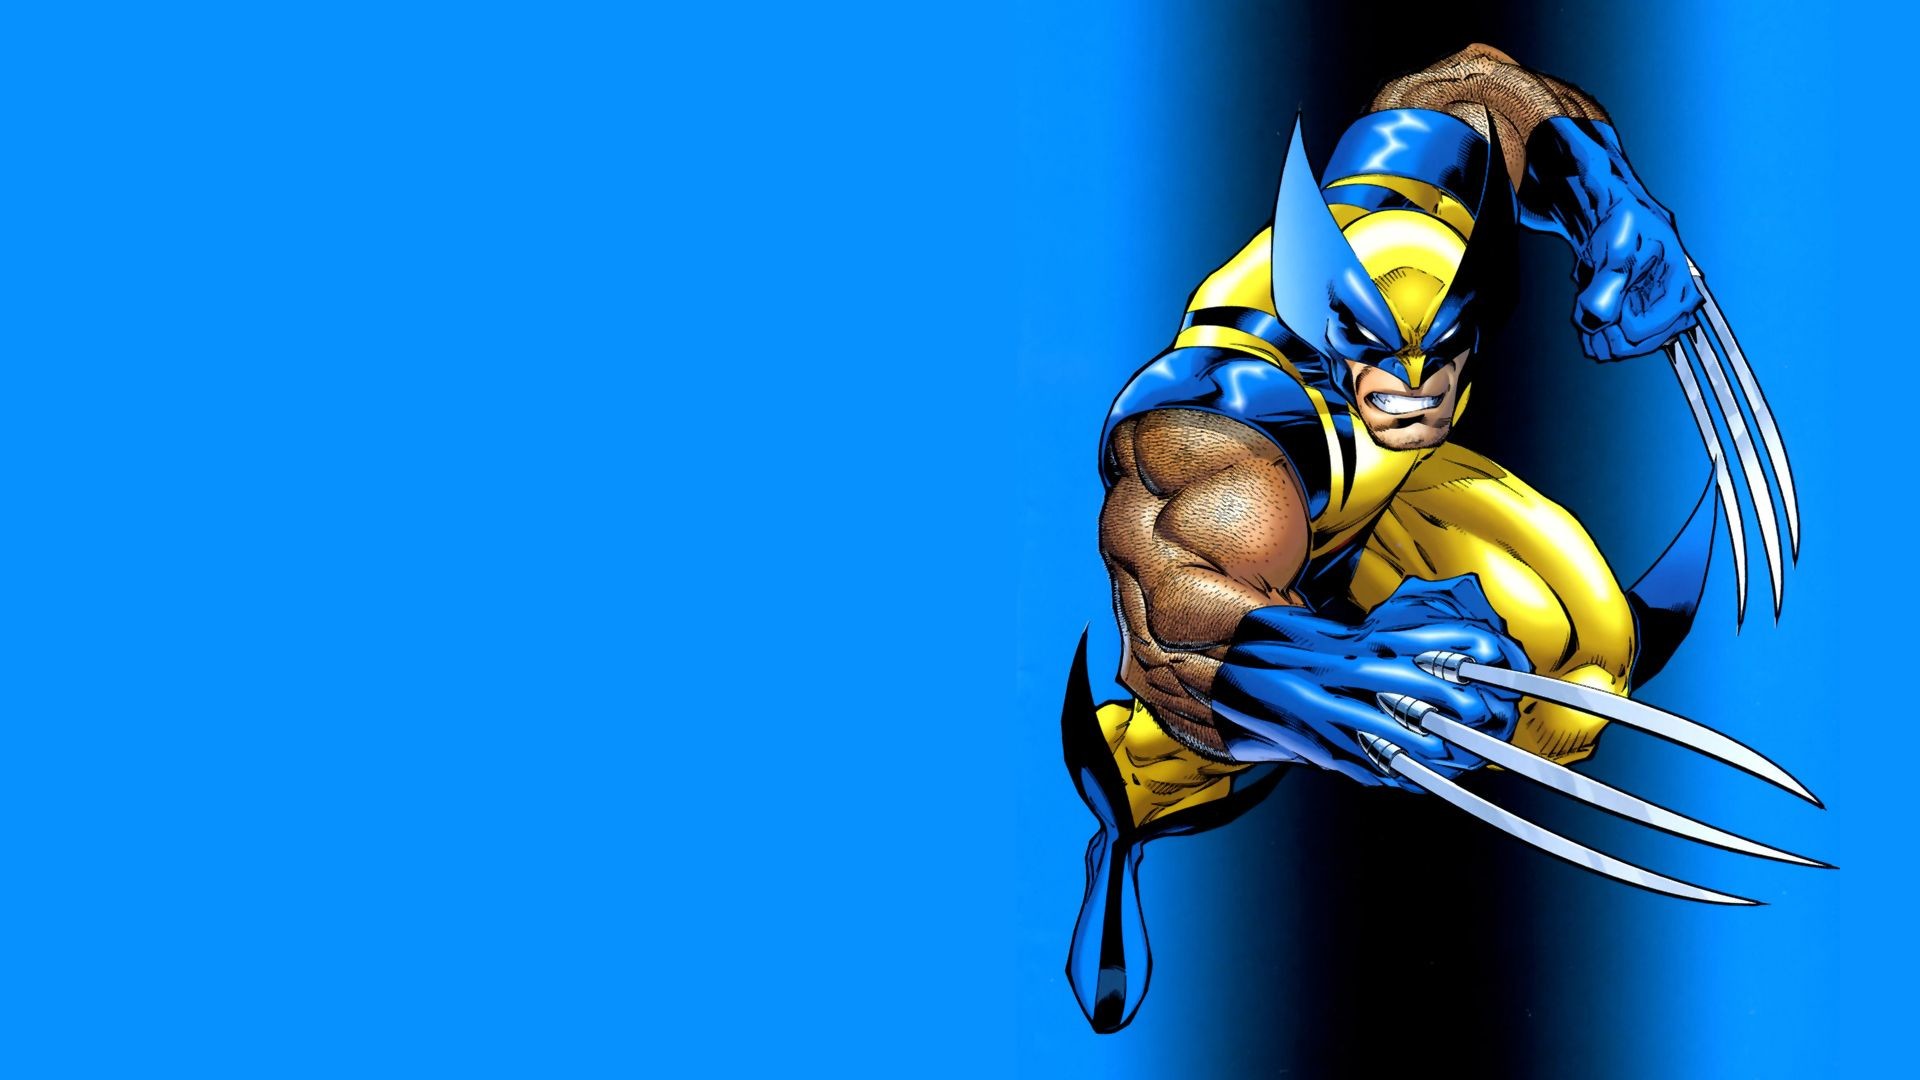 1920x1080, Wolverine Wallpapers Pictures Ã Wolverine - Wolverine Wallpaper Marvel 3d - HD Wallpaper 